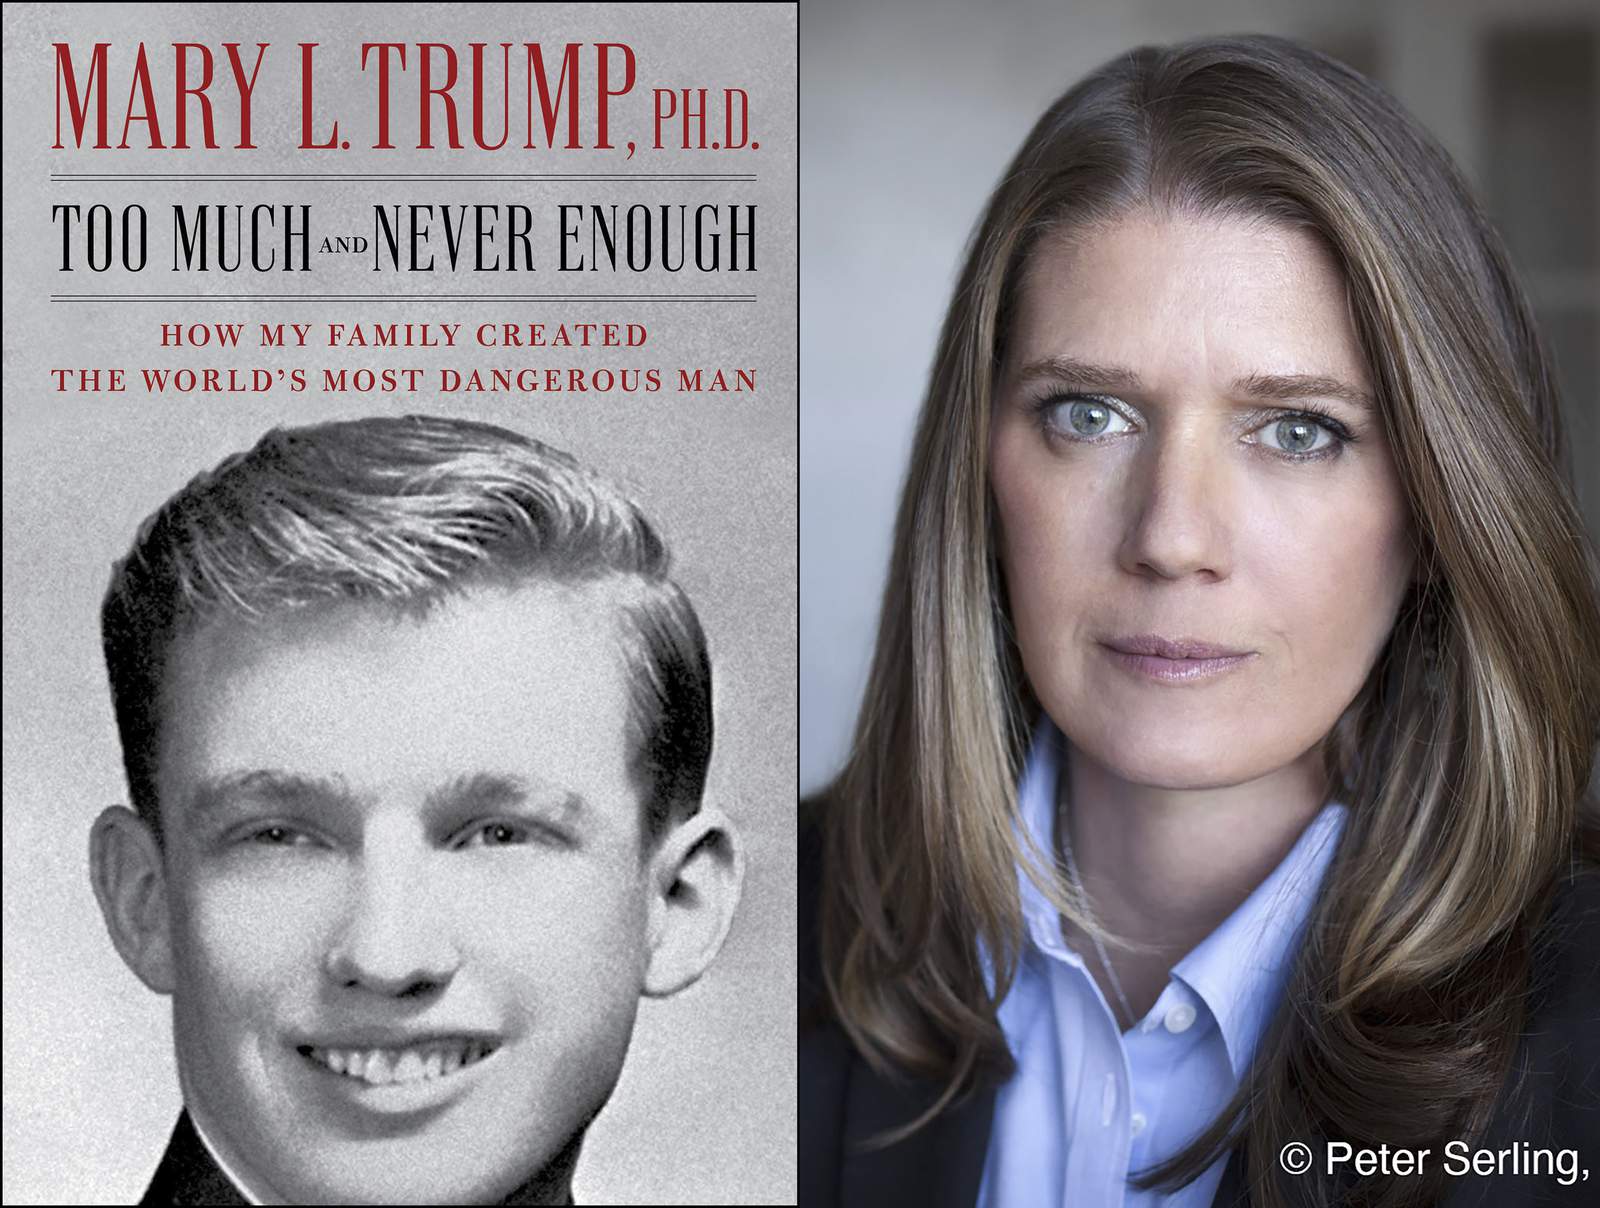 Mary Trump's book offers devastating portrayal of president